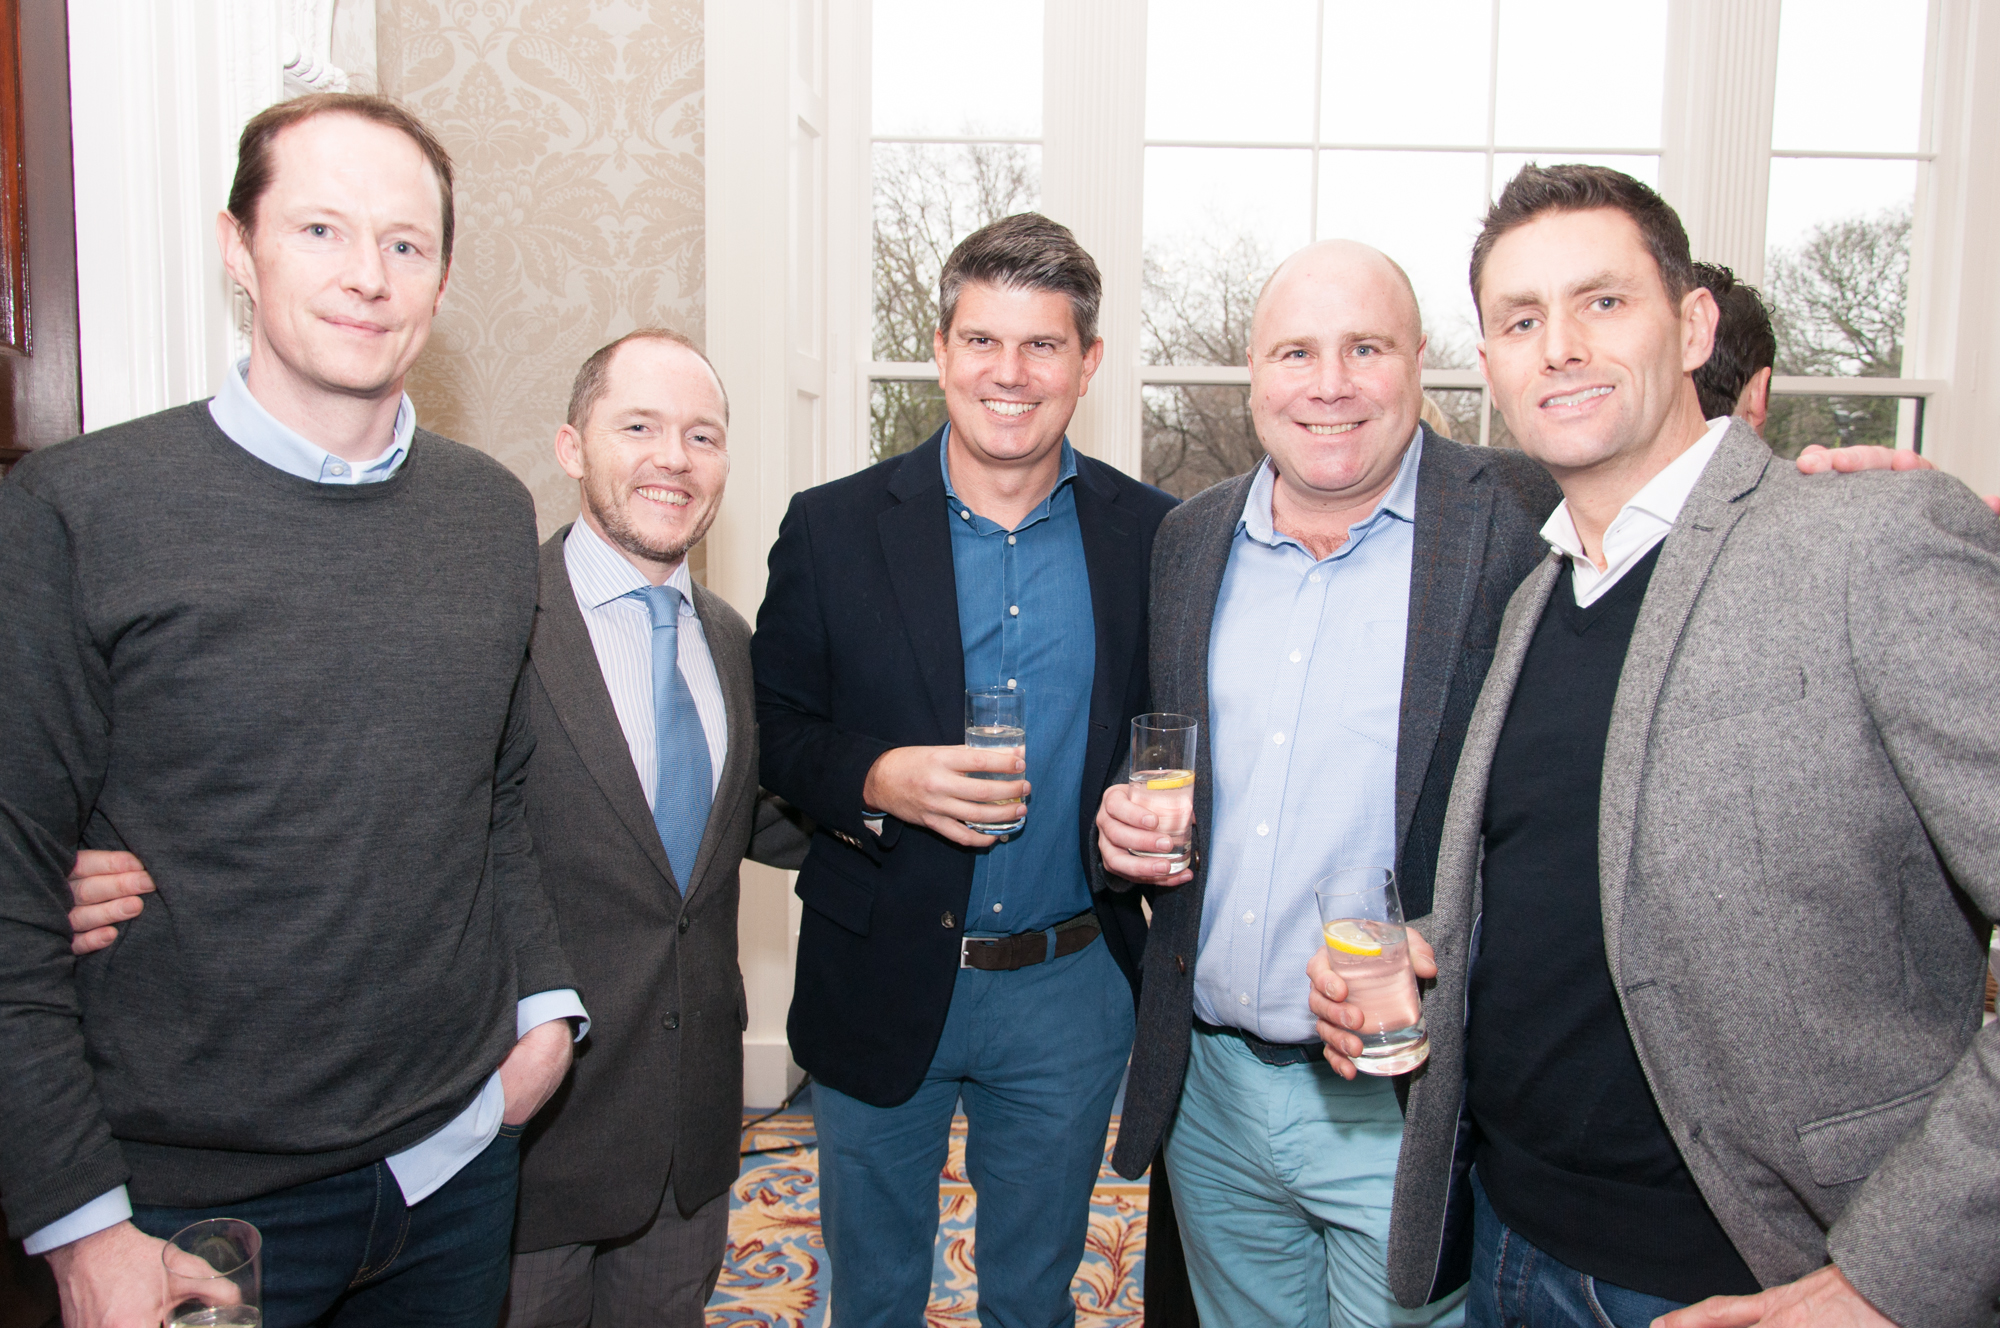 St Gerard's School Past Pupils Union Lunch at Shelbourne Hotel by Natalia Marzec_ low res70